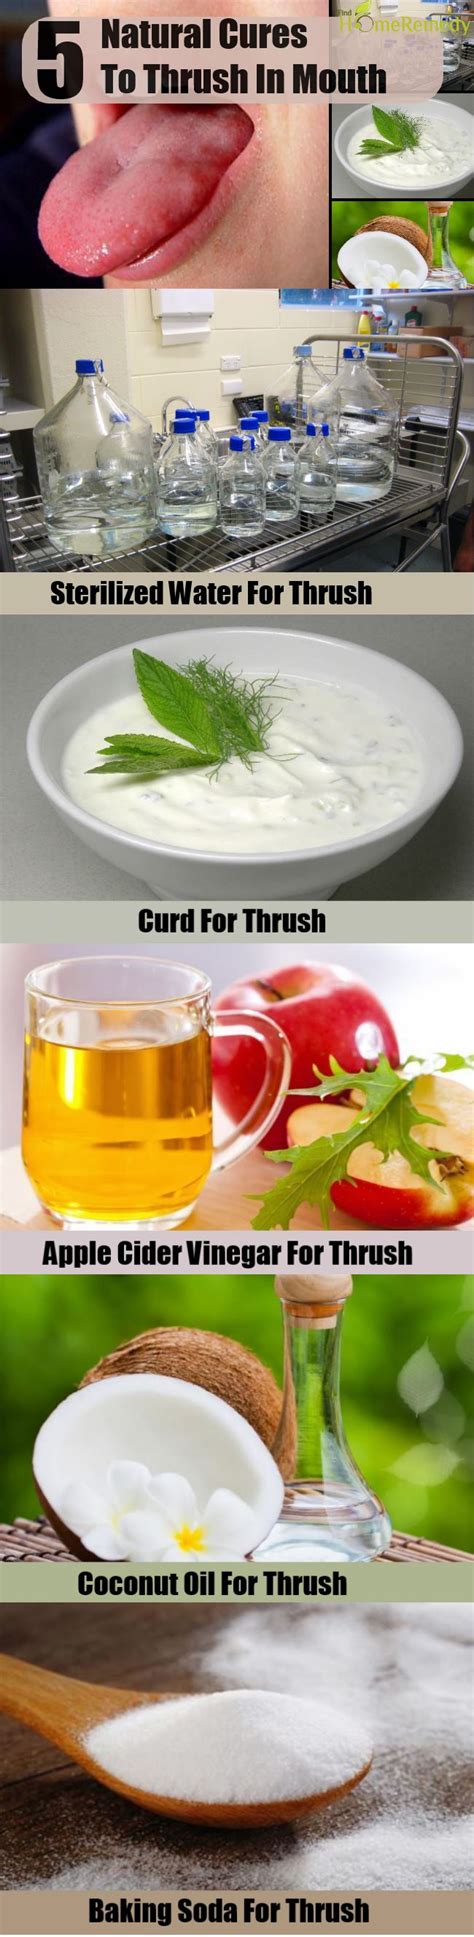 Natural Cure For Thrush In Mouth Effective Ways To Treat Thrush In